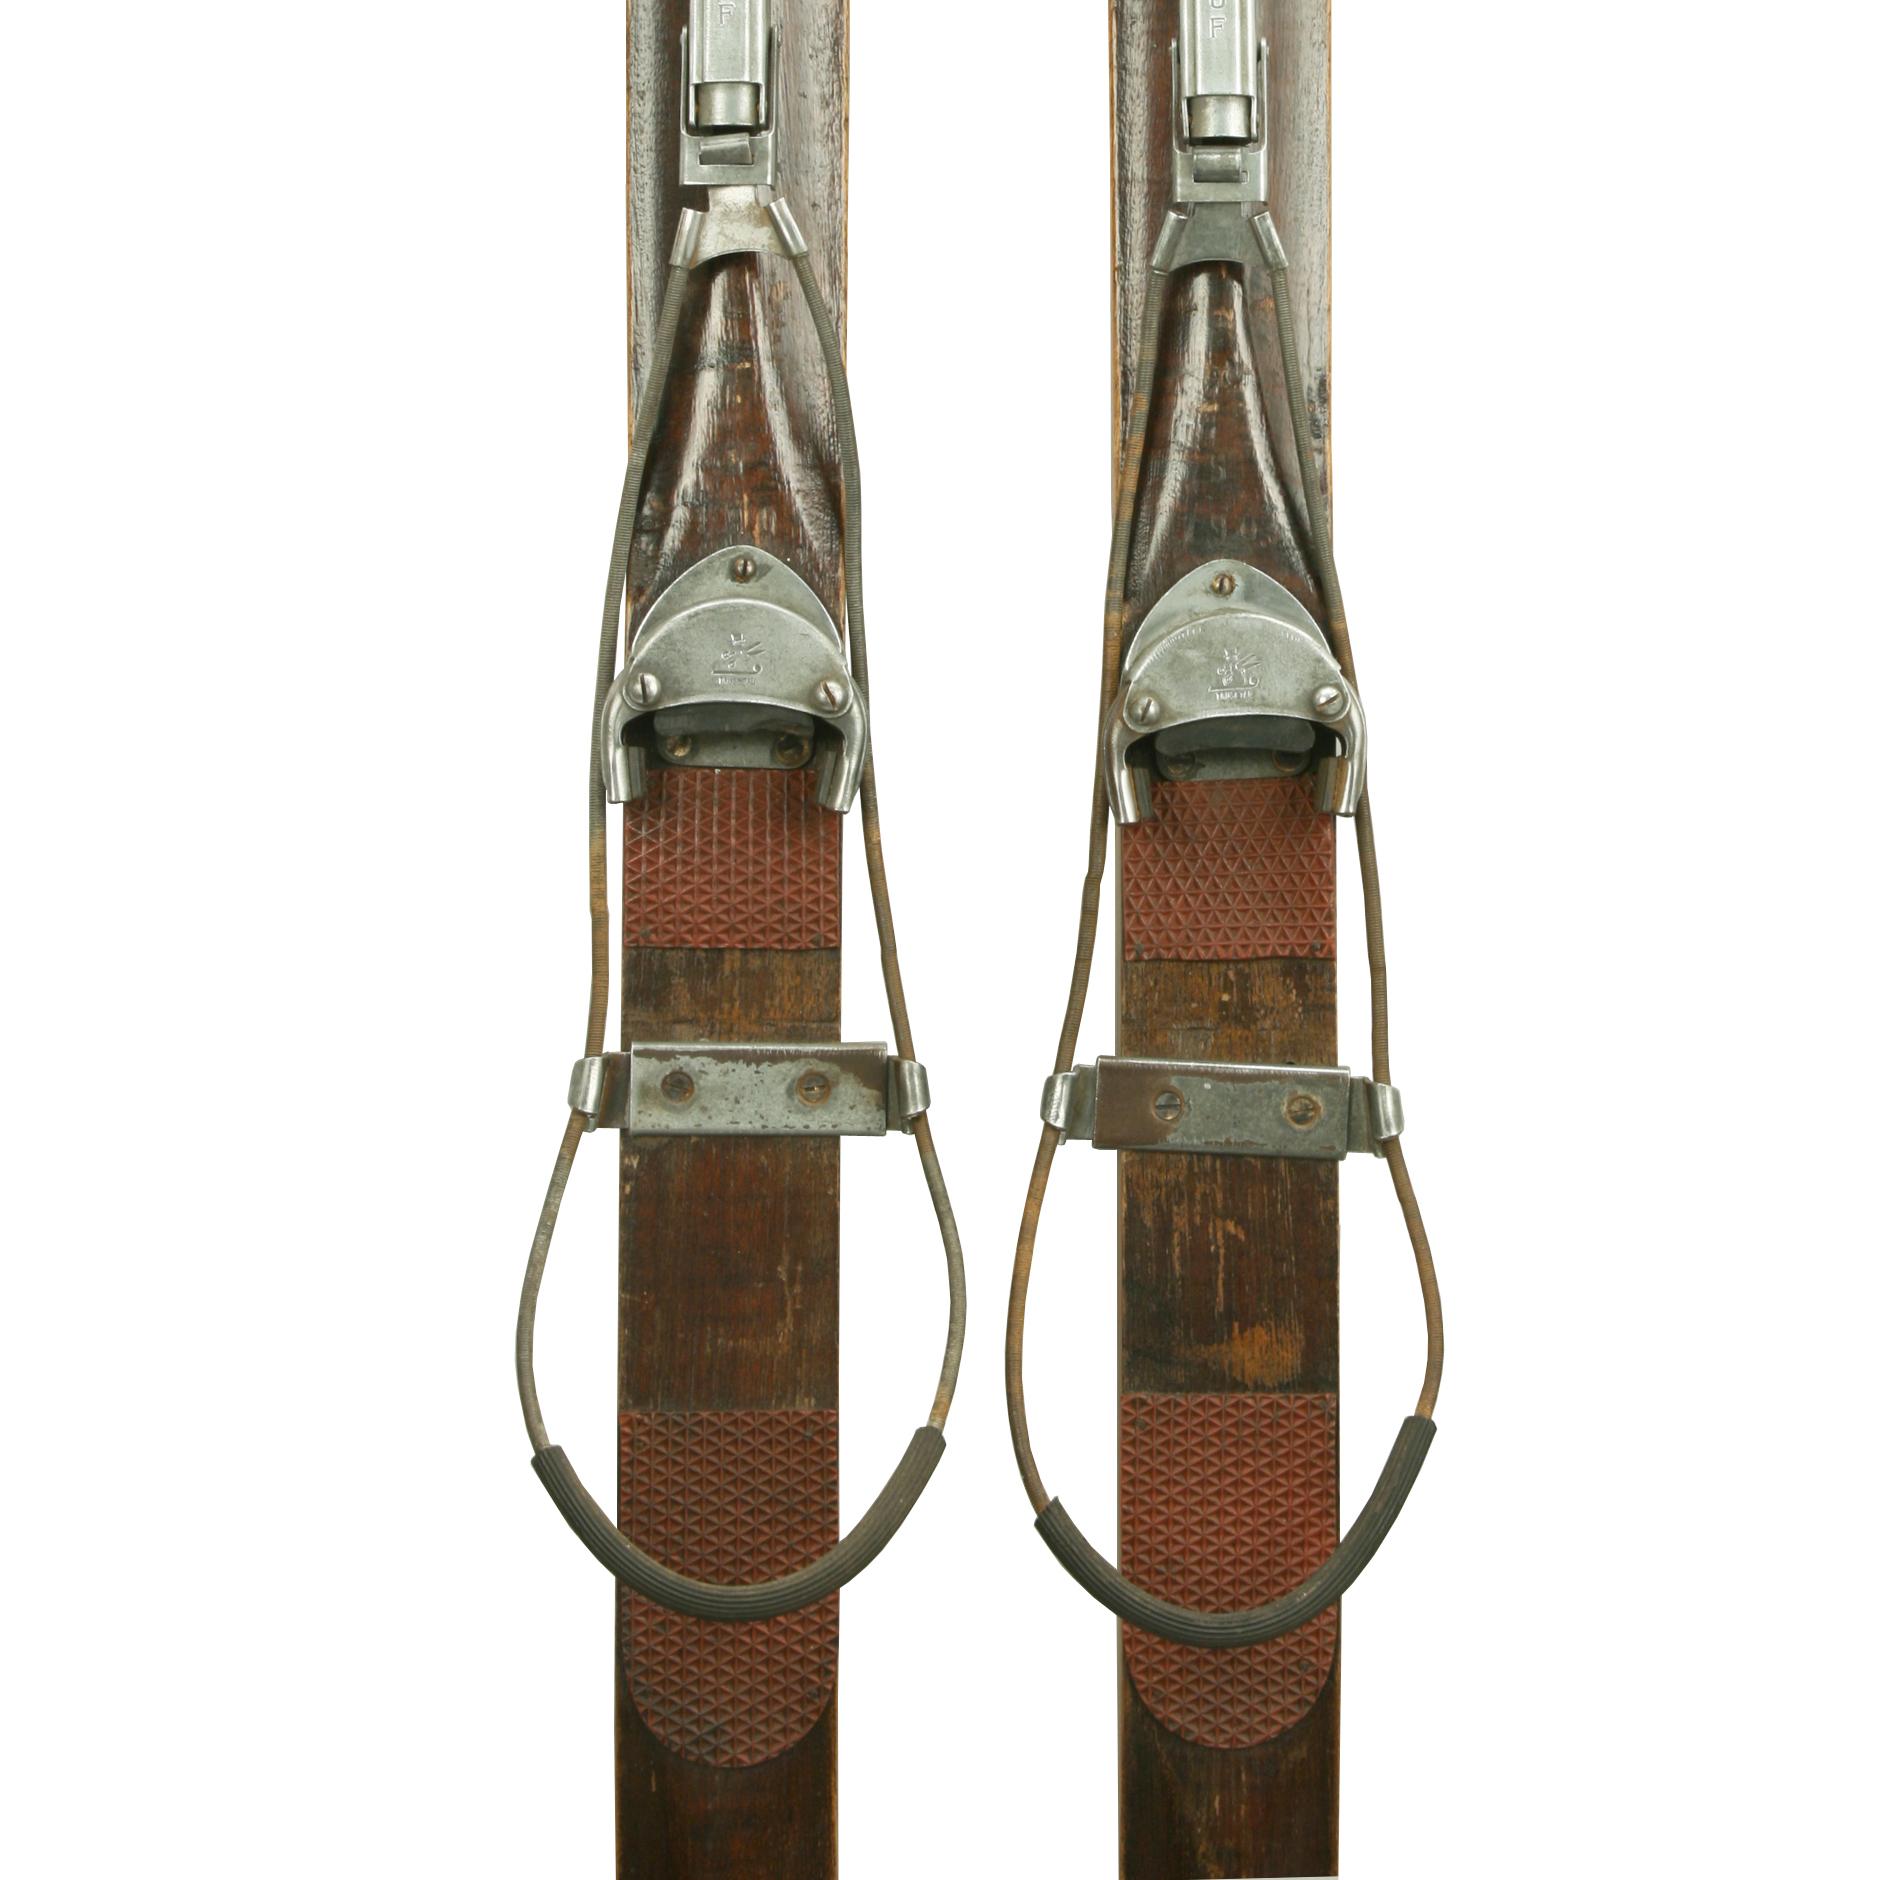 Antique Ash Skis with unique safety bindings.
A nice pair of ridge top ash skis with rubber foot plates and galvanised safety bindings. The bindings have a Trusetal toe unit that was designed to allow the toe of the boot to pop out during a fall.